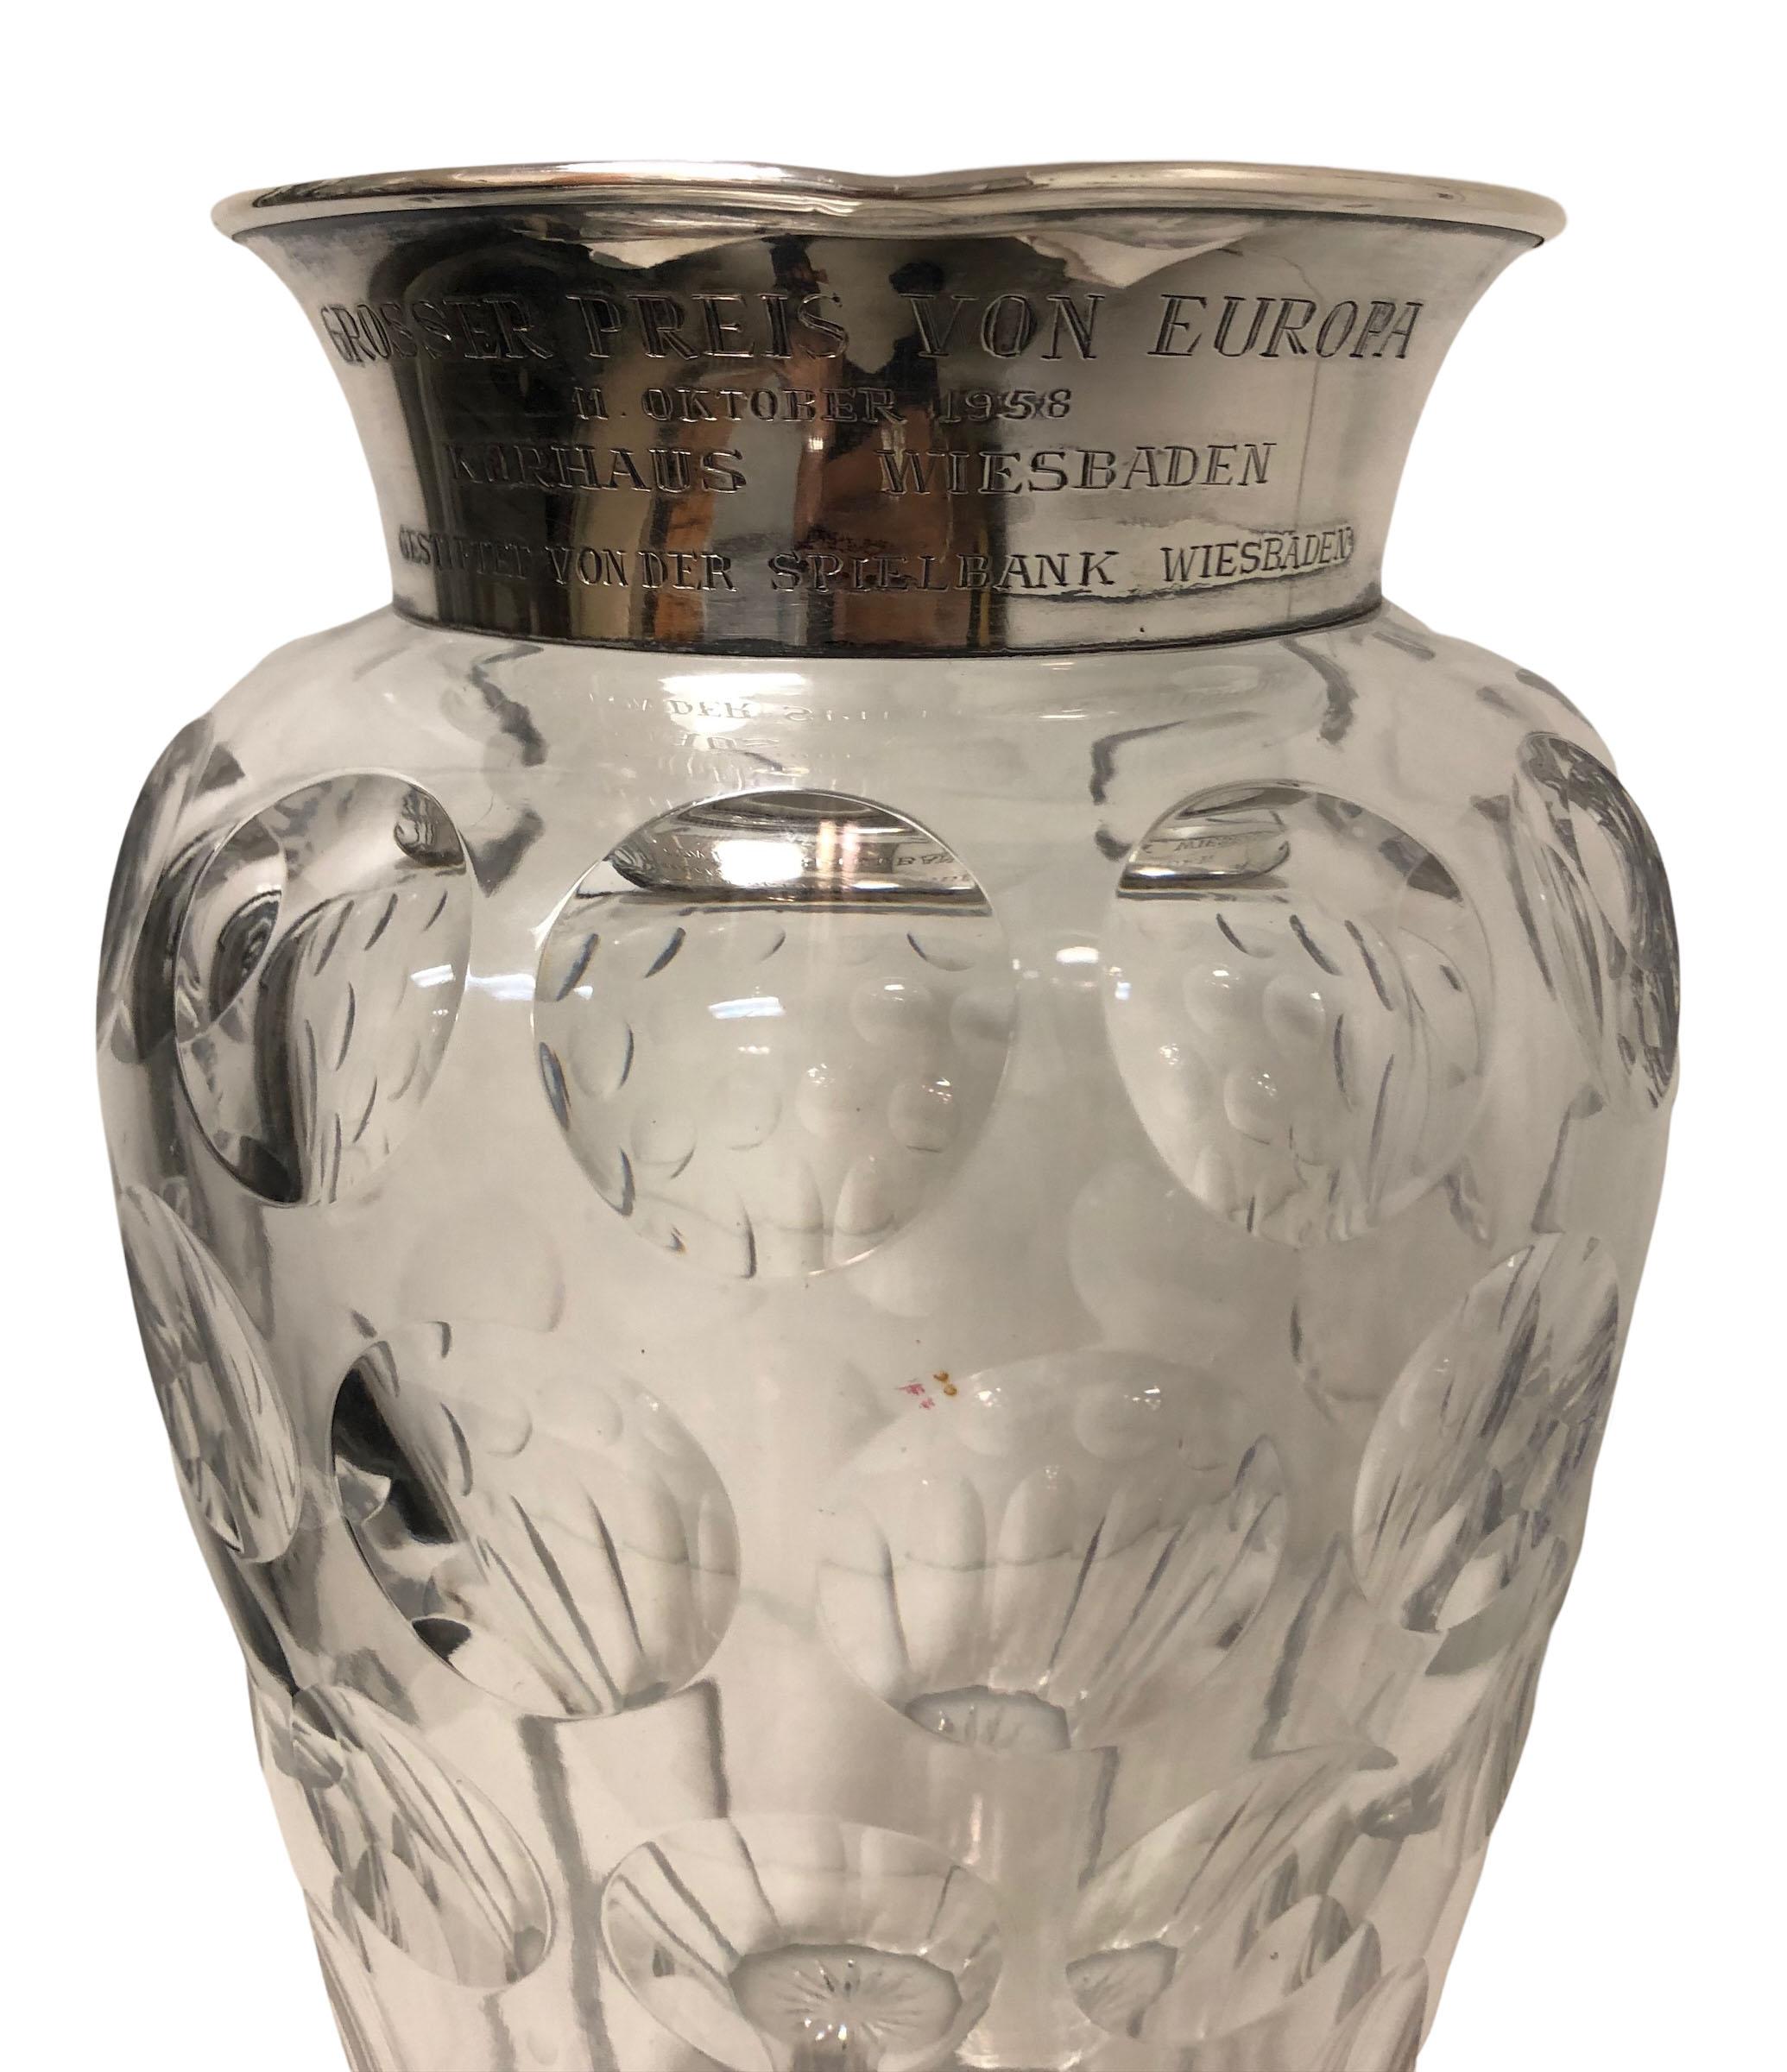 A German crystal presentation piece with a sterling silver monogrammed top. The high-quality crystal has three rows of large polkadots a whimsical and attractive design. Monogram is in German but does not look like German glass it looks rich and it